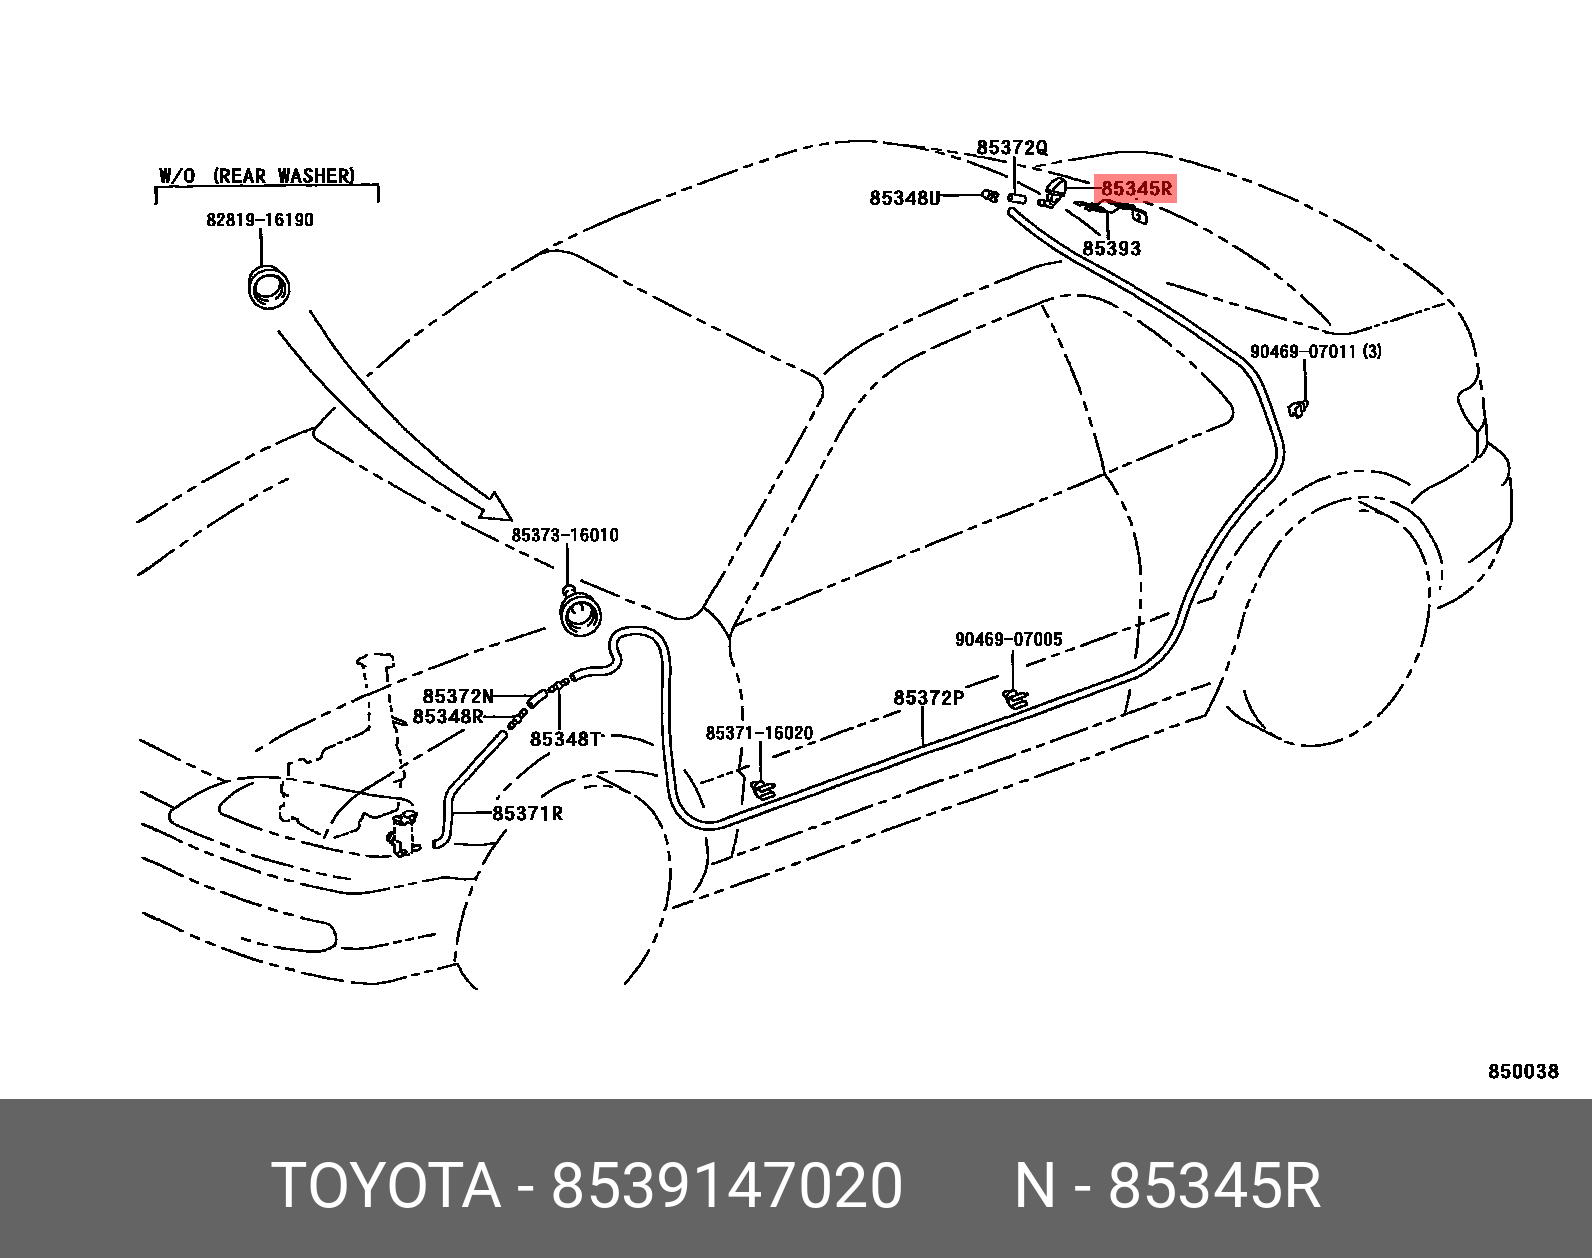 PRIUS (PLUG-IN) LEASE 200912 - 201010, NOZZLE, REAR WASHER